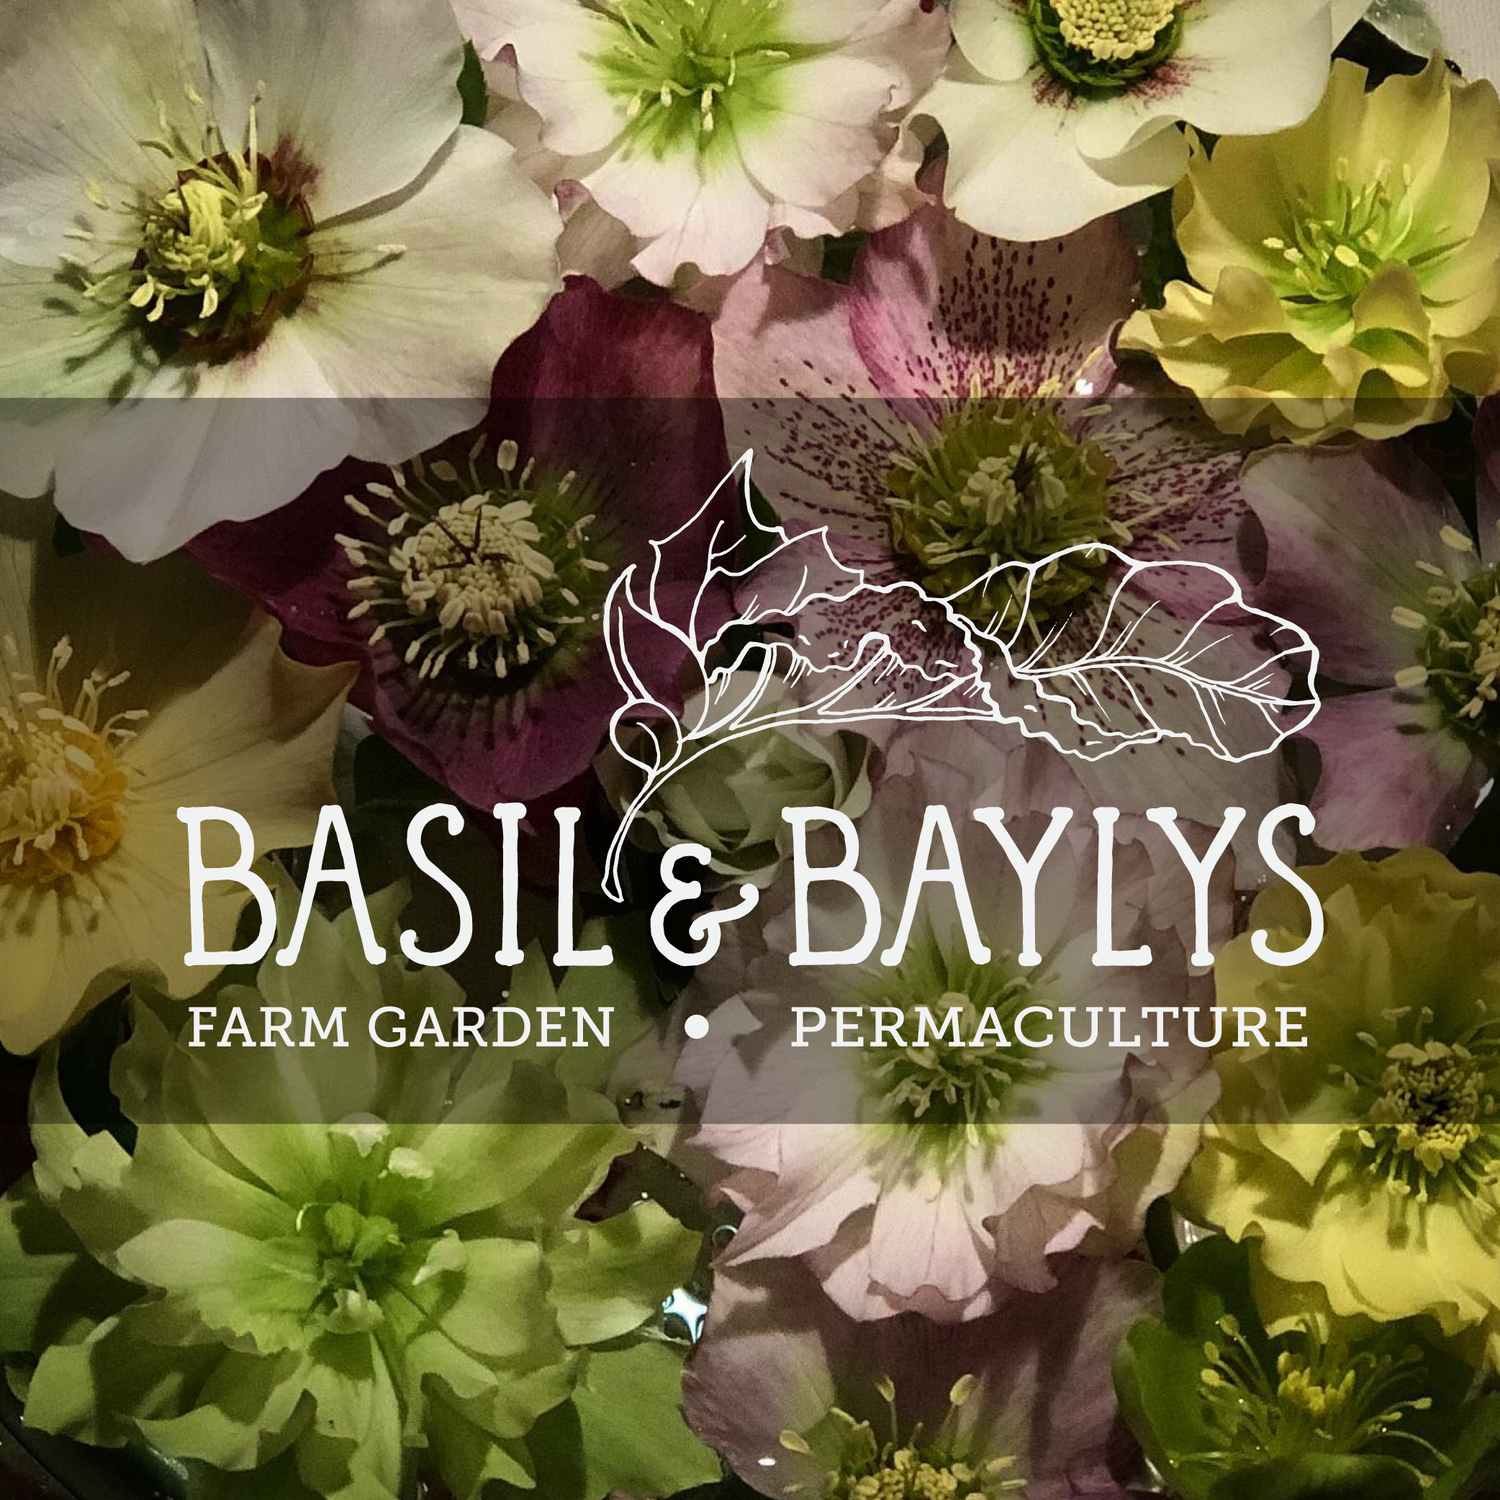 Basil and Baylys, farm garden, permaculture logo sitting over a background of multicoloured hellebore flowers in shades of yellow, lime, pink and deep red